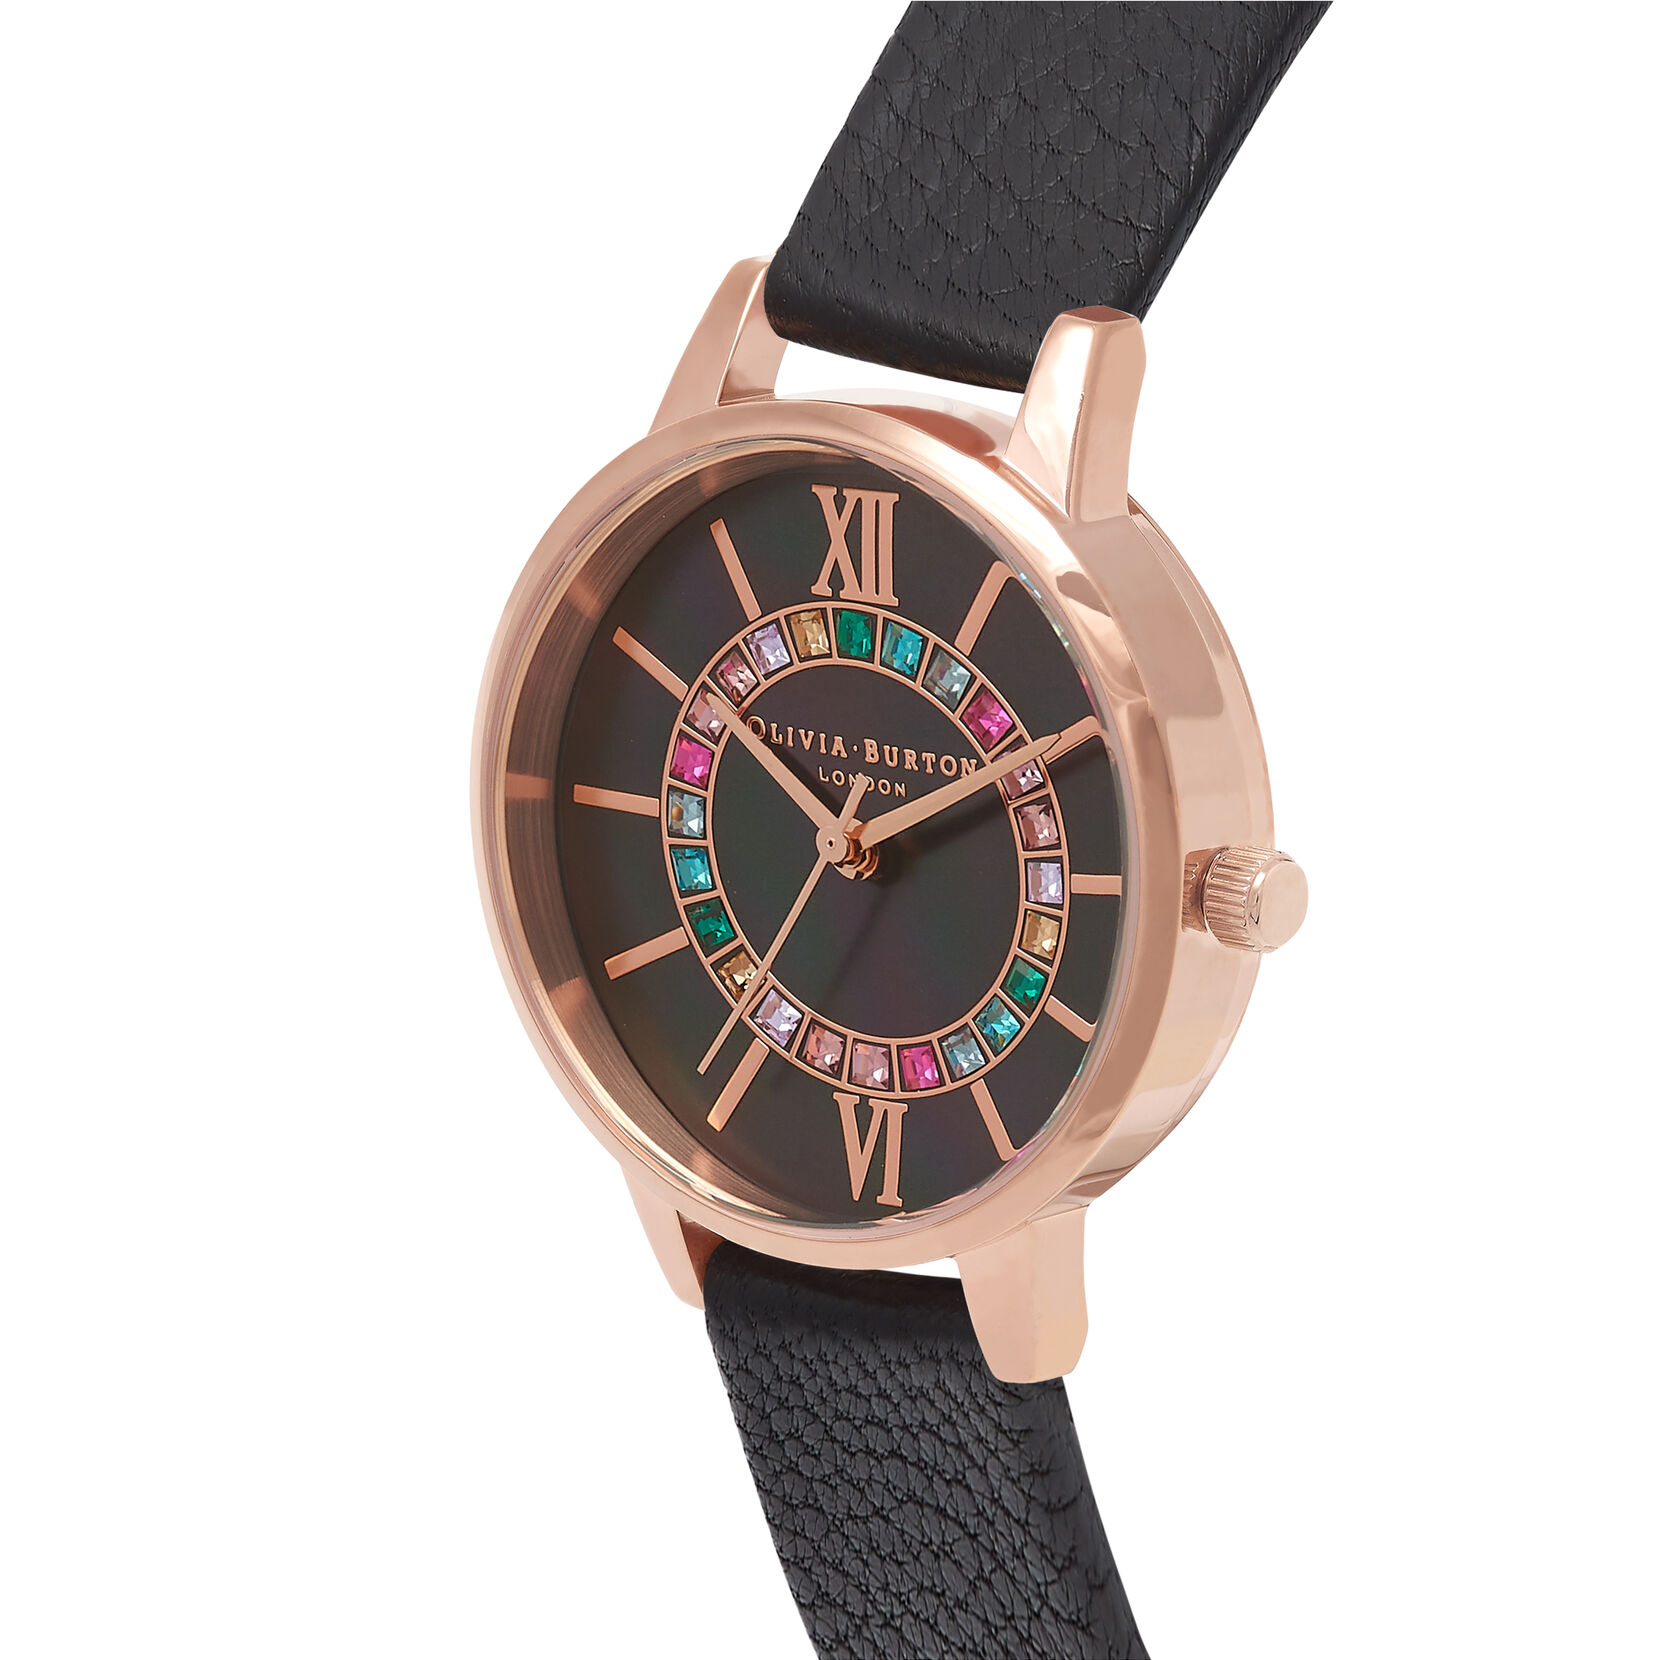 30mm Rose Gold & Black Leather Strap Watch